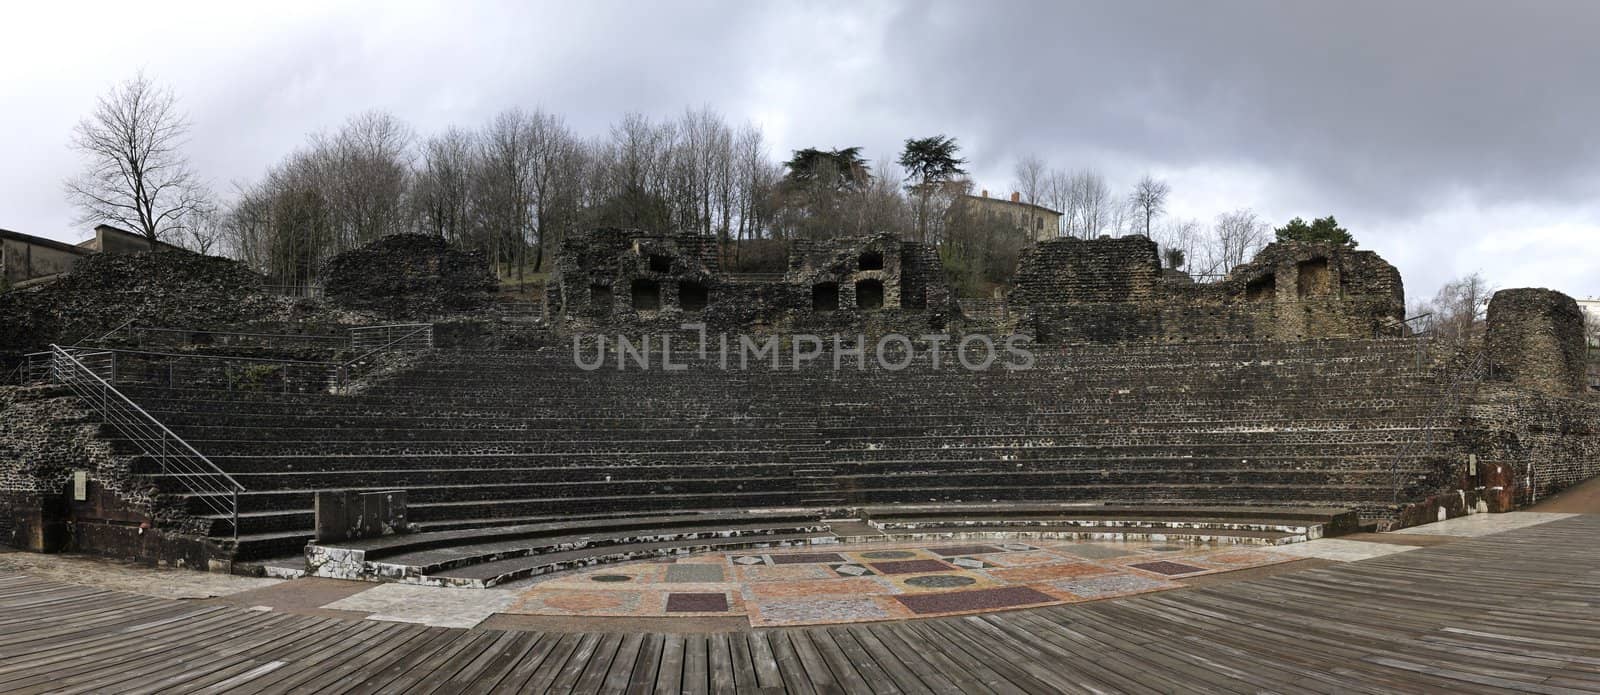 Panoramic view of an old Roman theatre in Lyon city